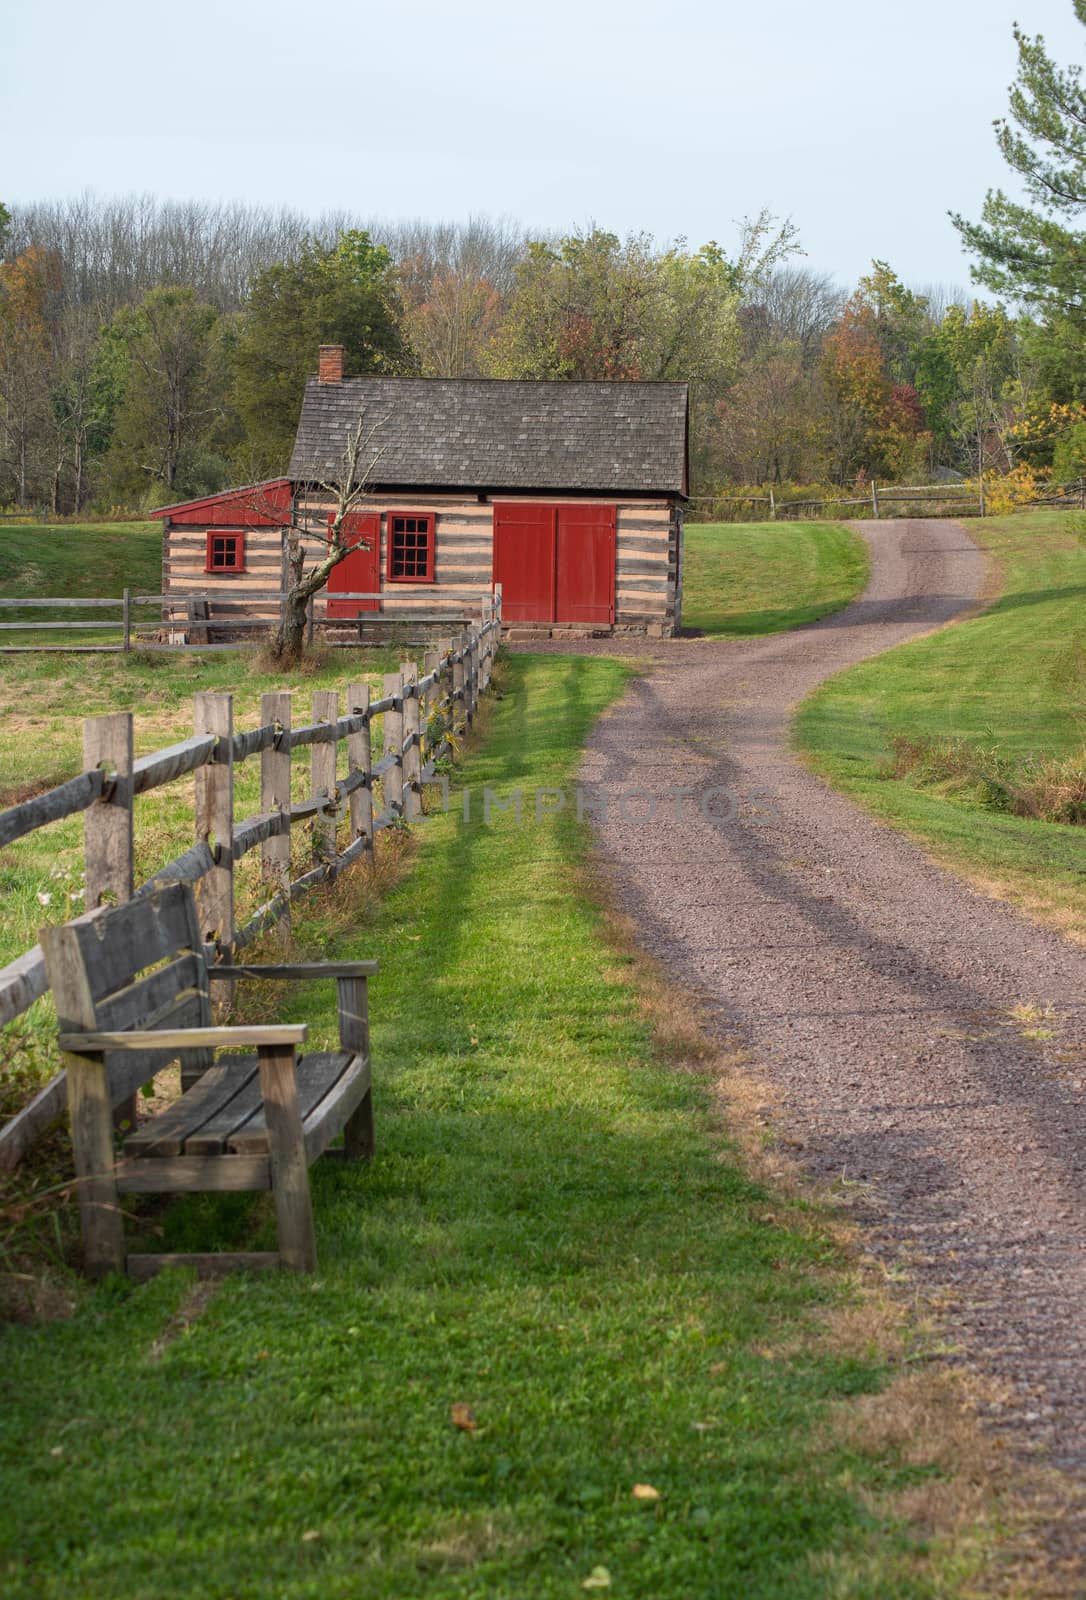 Rustic colonial Pennsylvania log cabin with red doors and windows along a winding footpath with an empty wooden bench. Green grass and Autumn foliage.